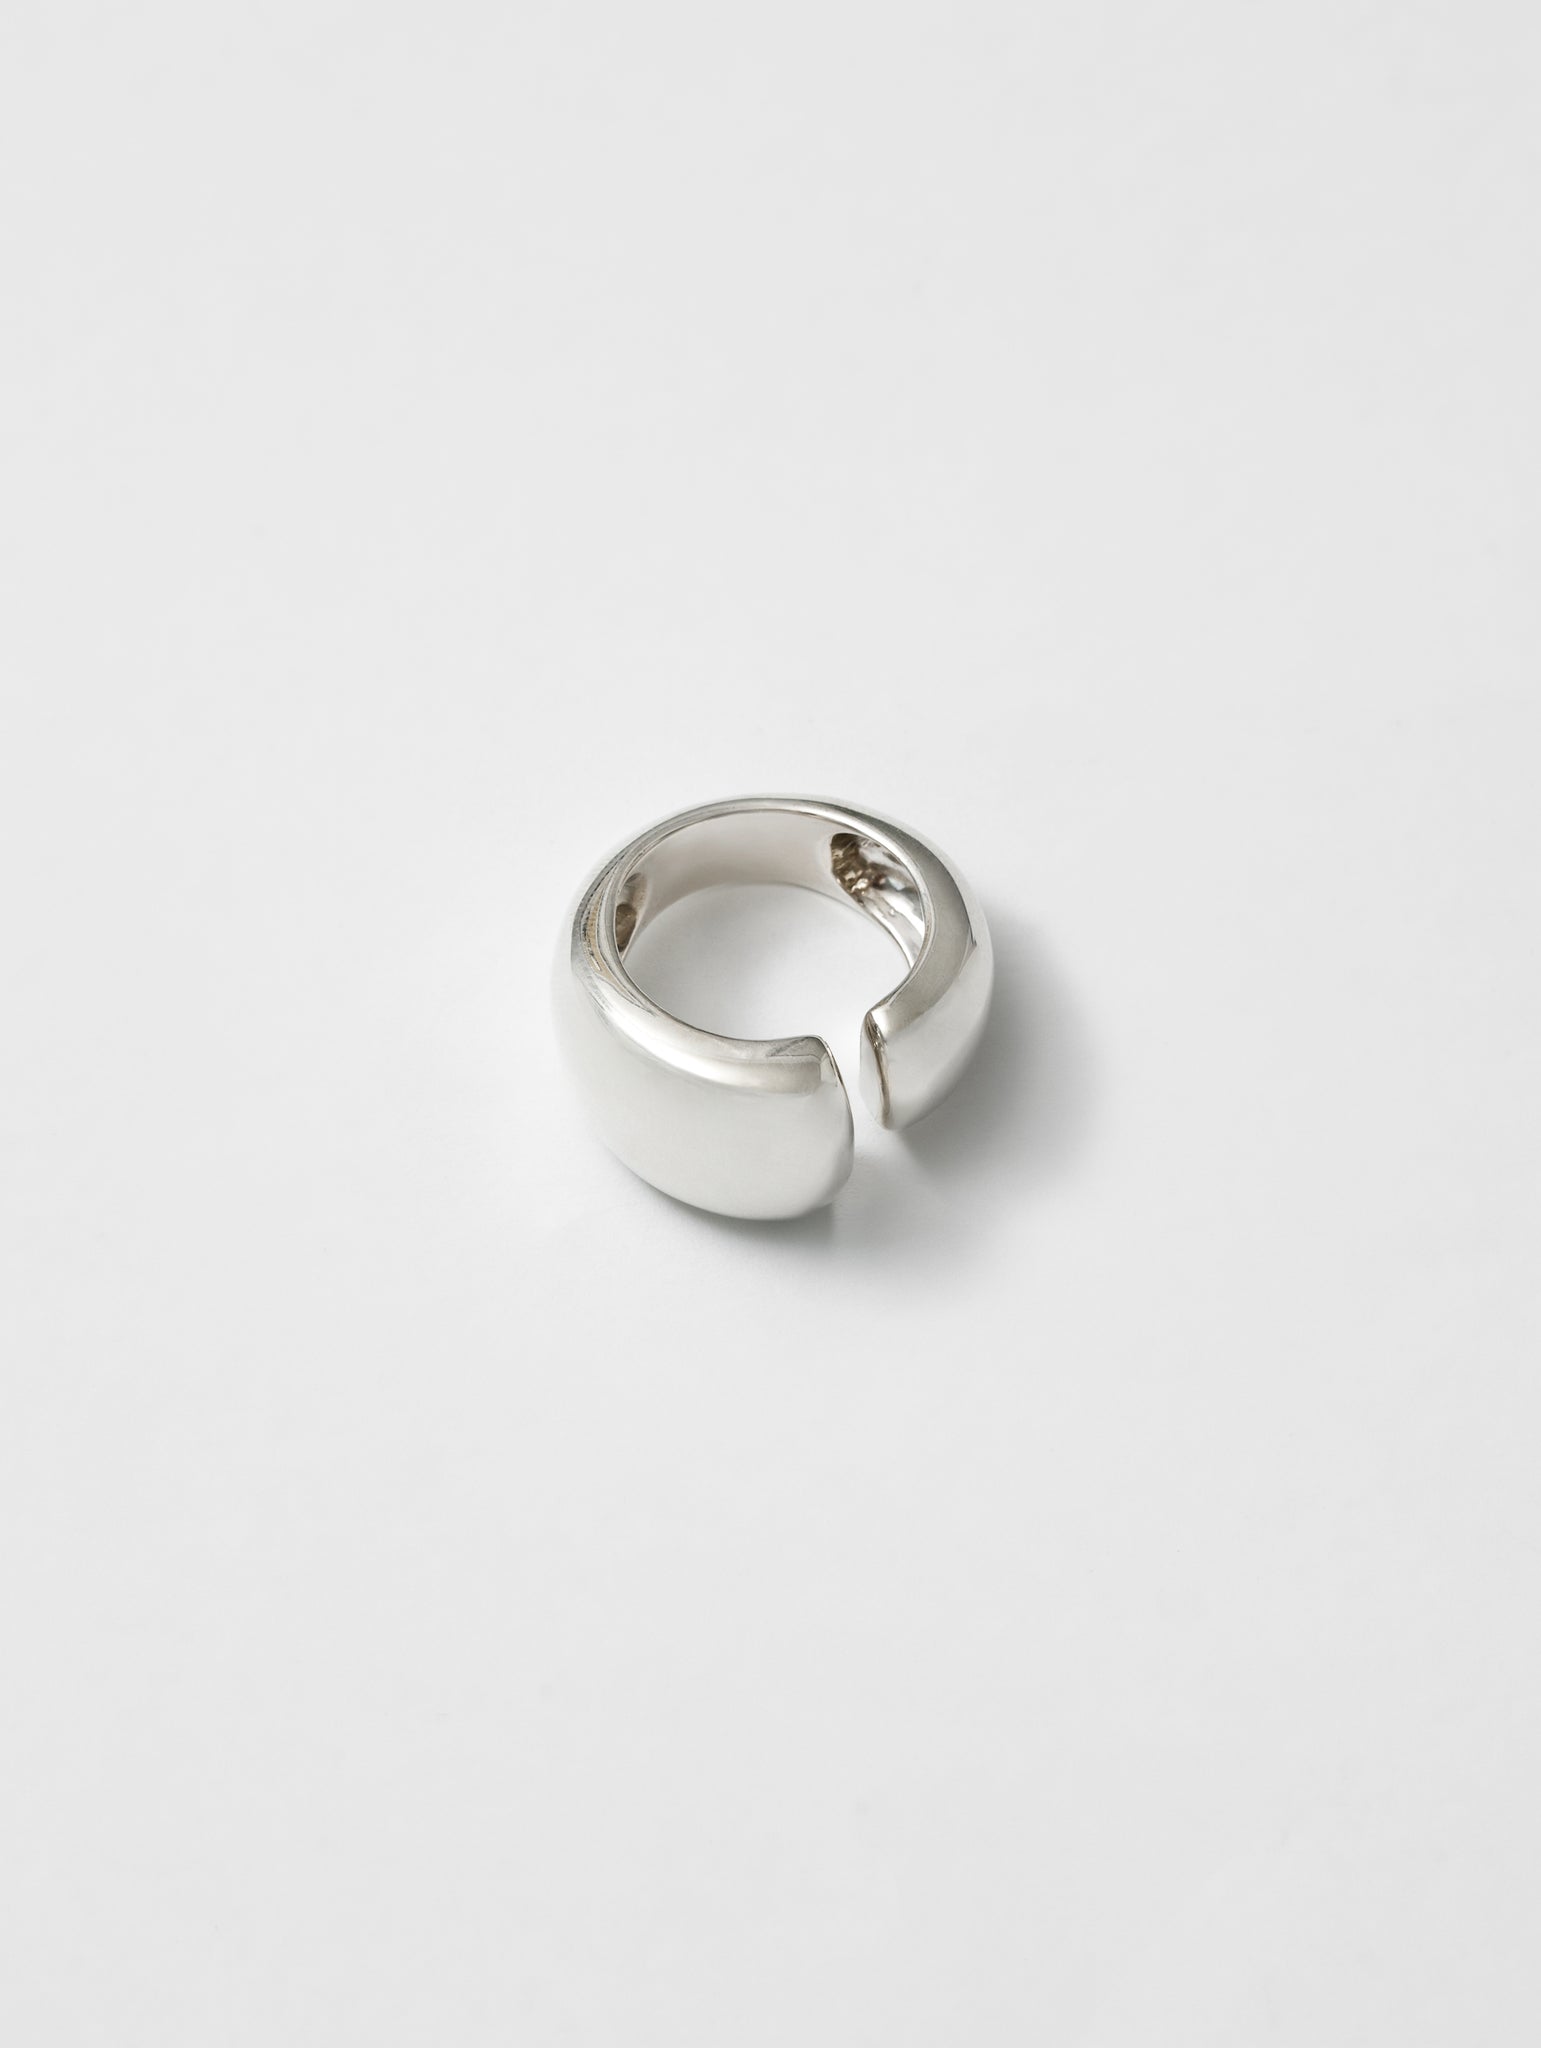 Wolf Circus Statement Gap Open Ring in Sterling Silver | Canal Ring in Sterling Silver-Rings-wolfcircus.com